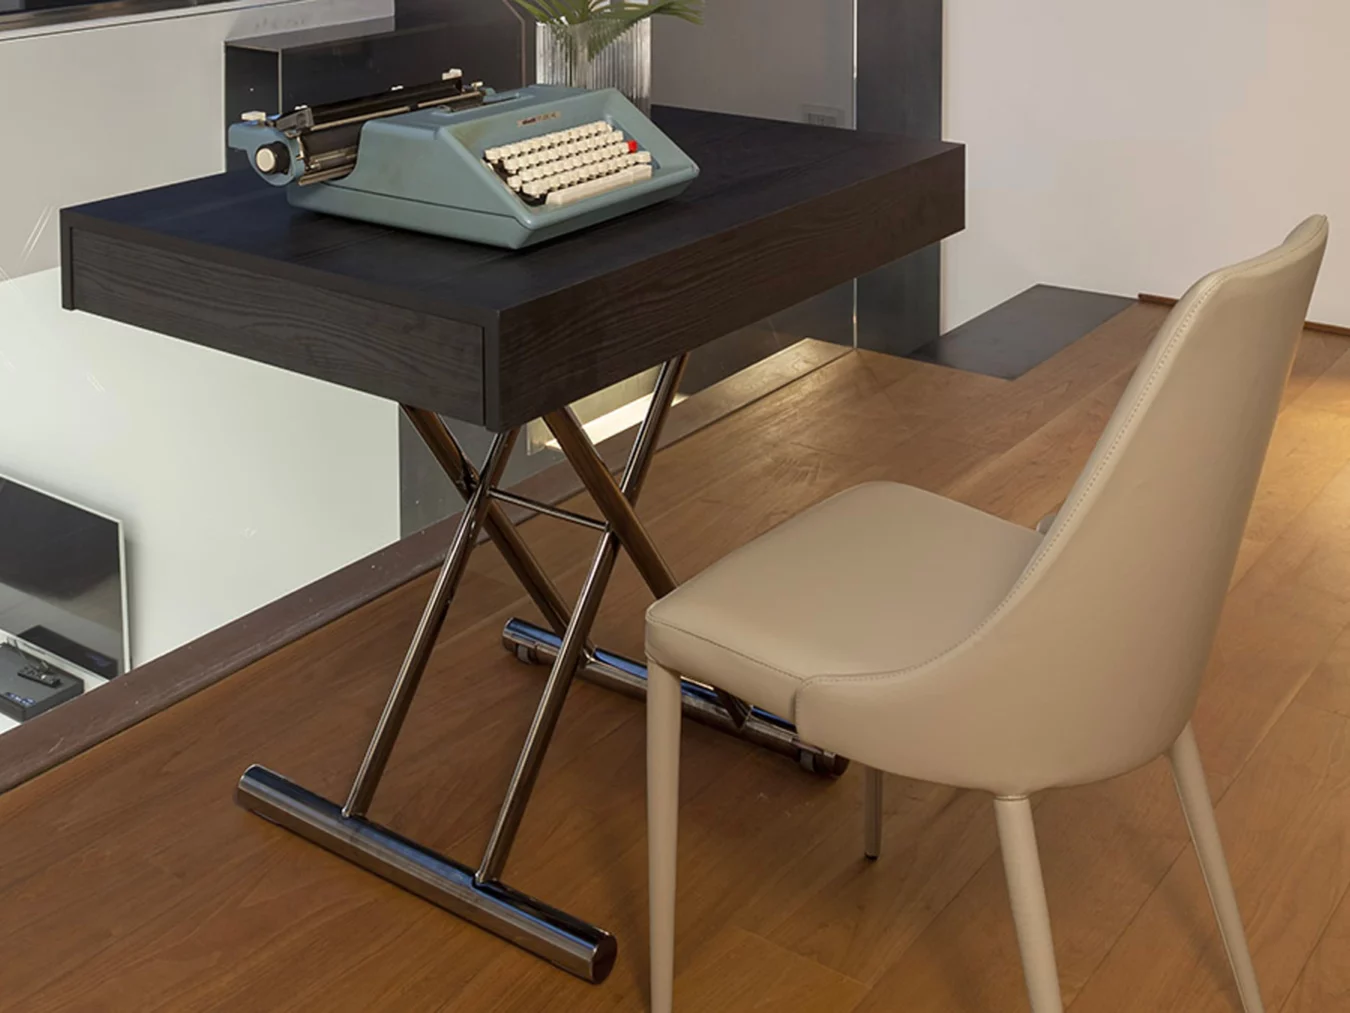 Petite table basse relevable